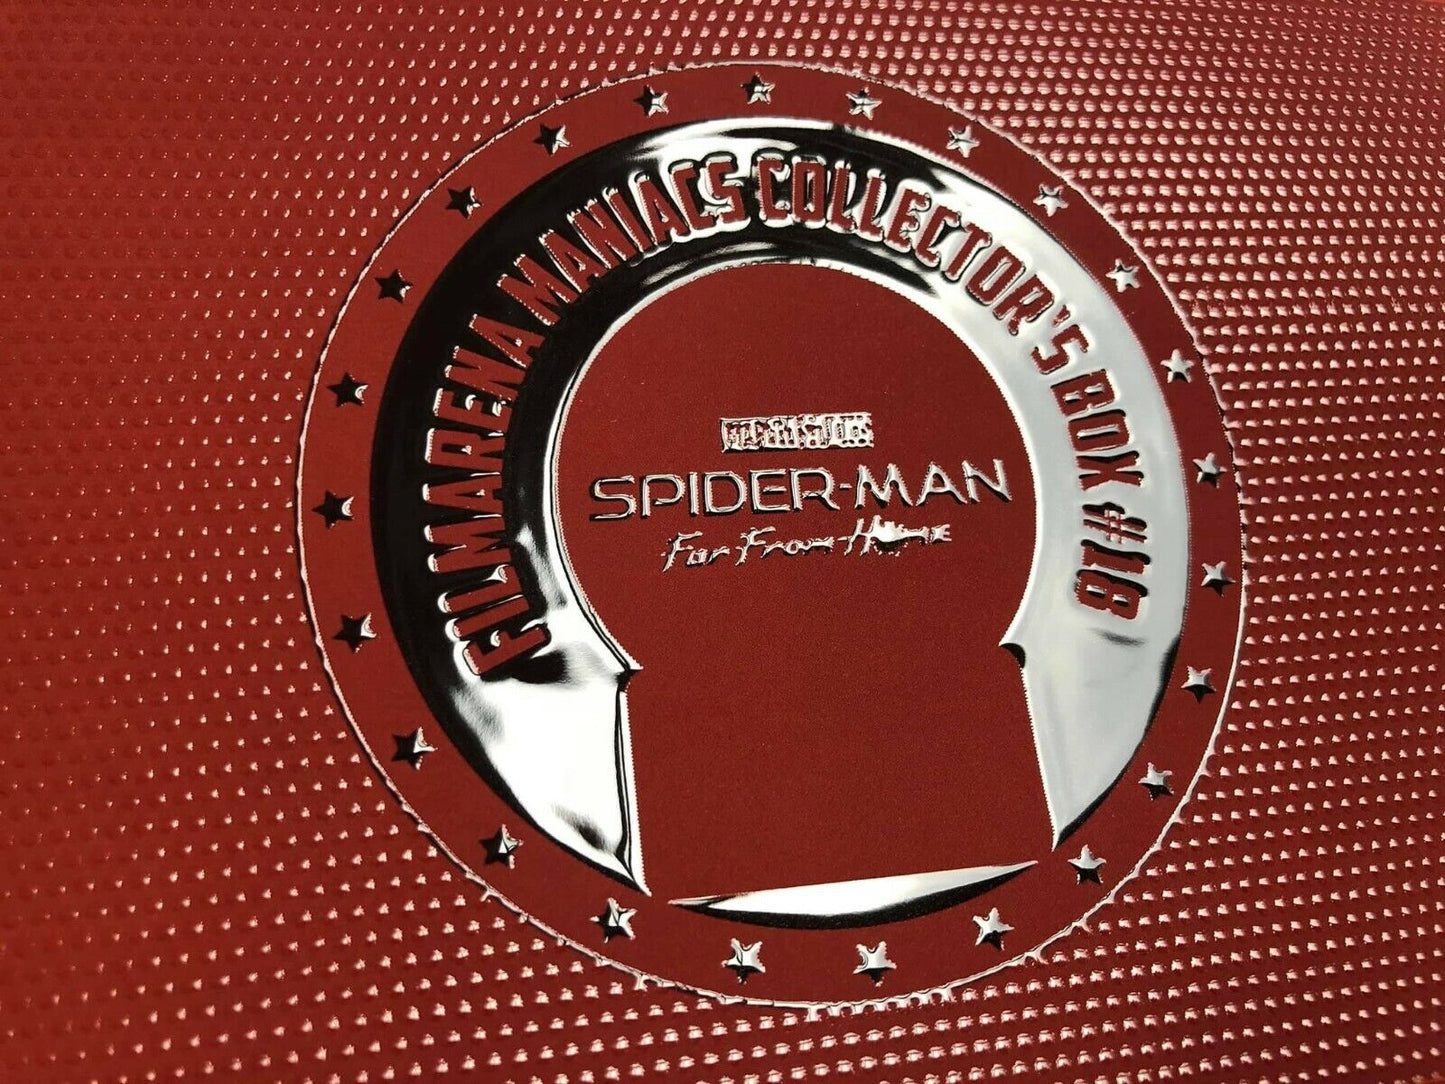 Spider-Man: Far from Home 4K+3D+2D Blu-ray Steelbook Filmarena Collection #128 E4 Maniac's Collectors Box